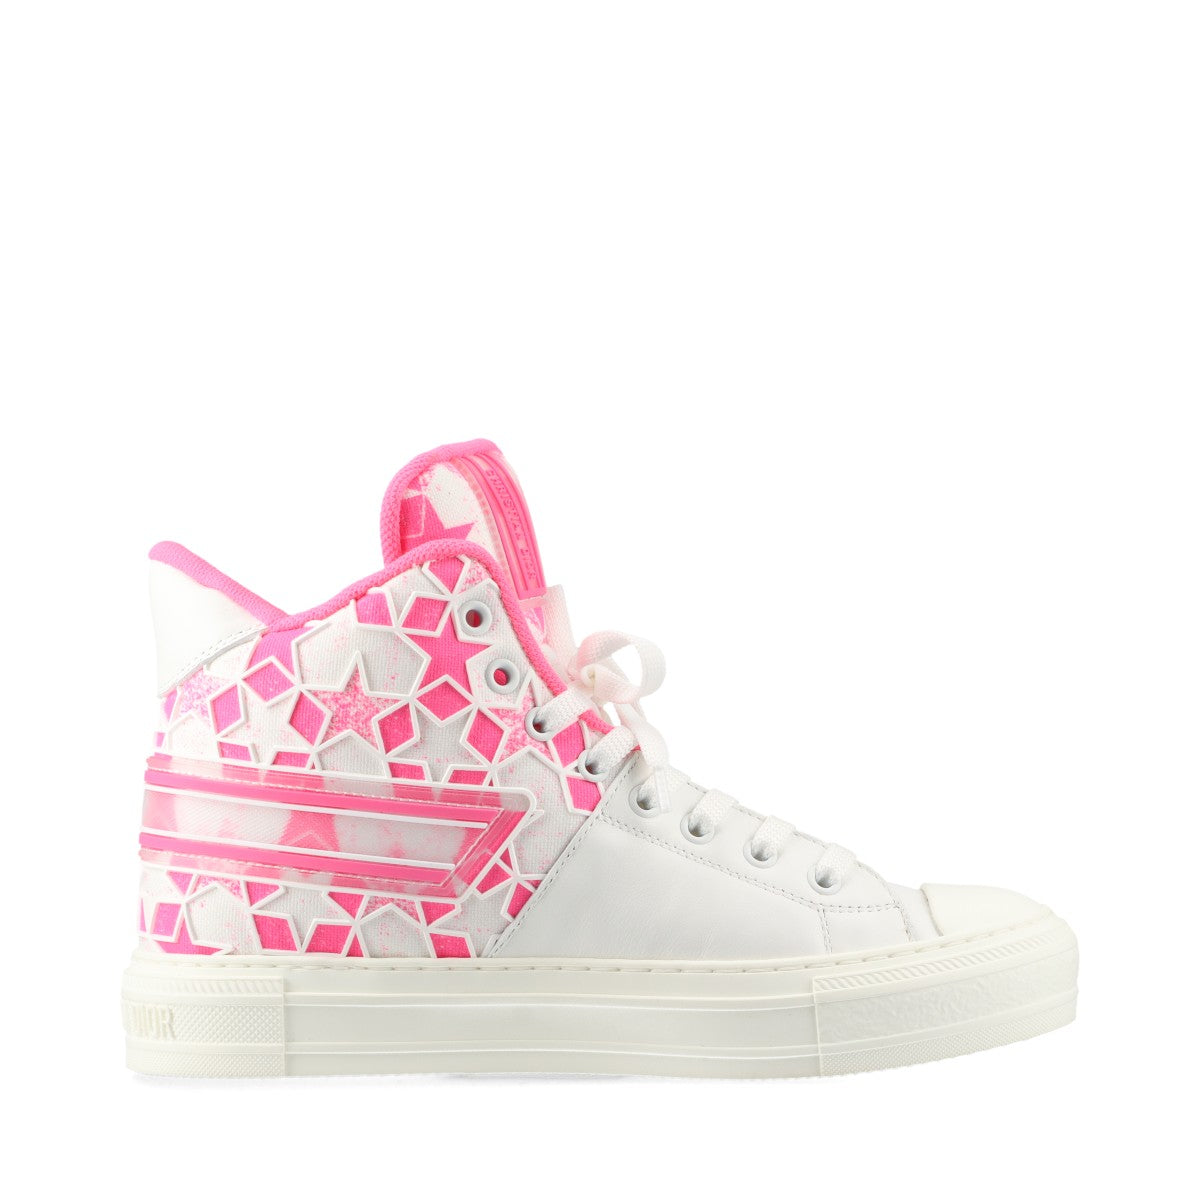 Christian Dior Leather x fabric High-top Sneakers EU37 Ladies' White x pink WALK'N'DIOR STA Star Replacement string box There is a bag